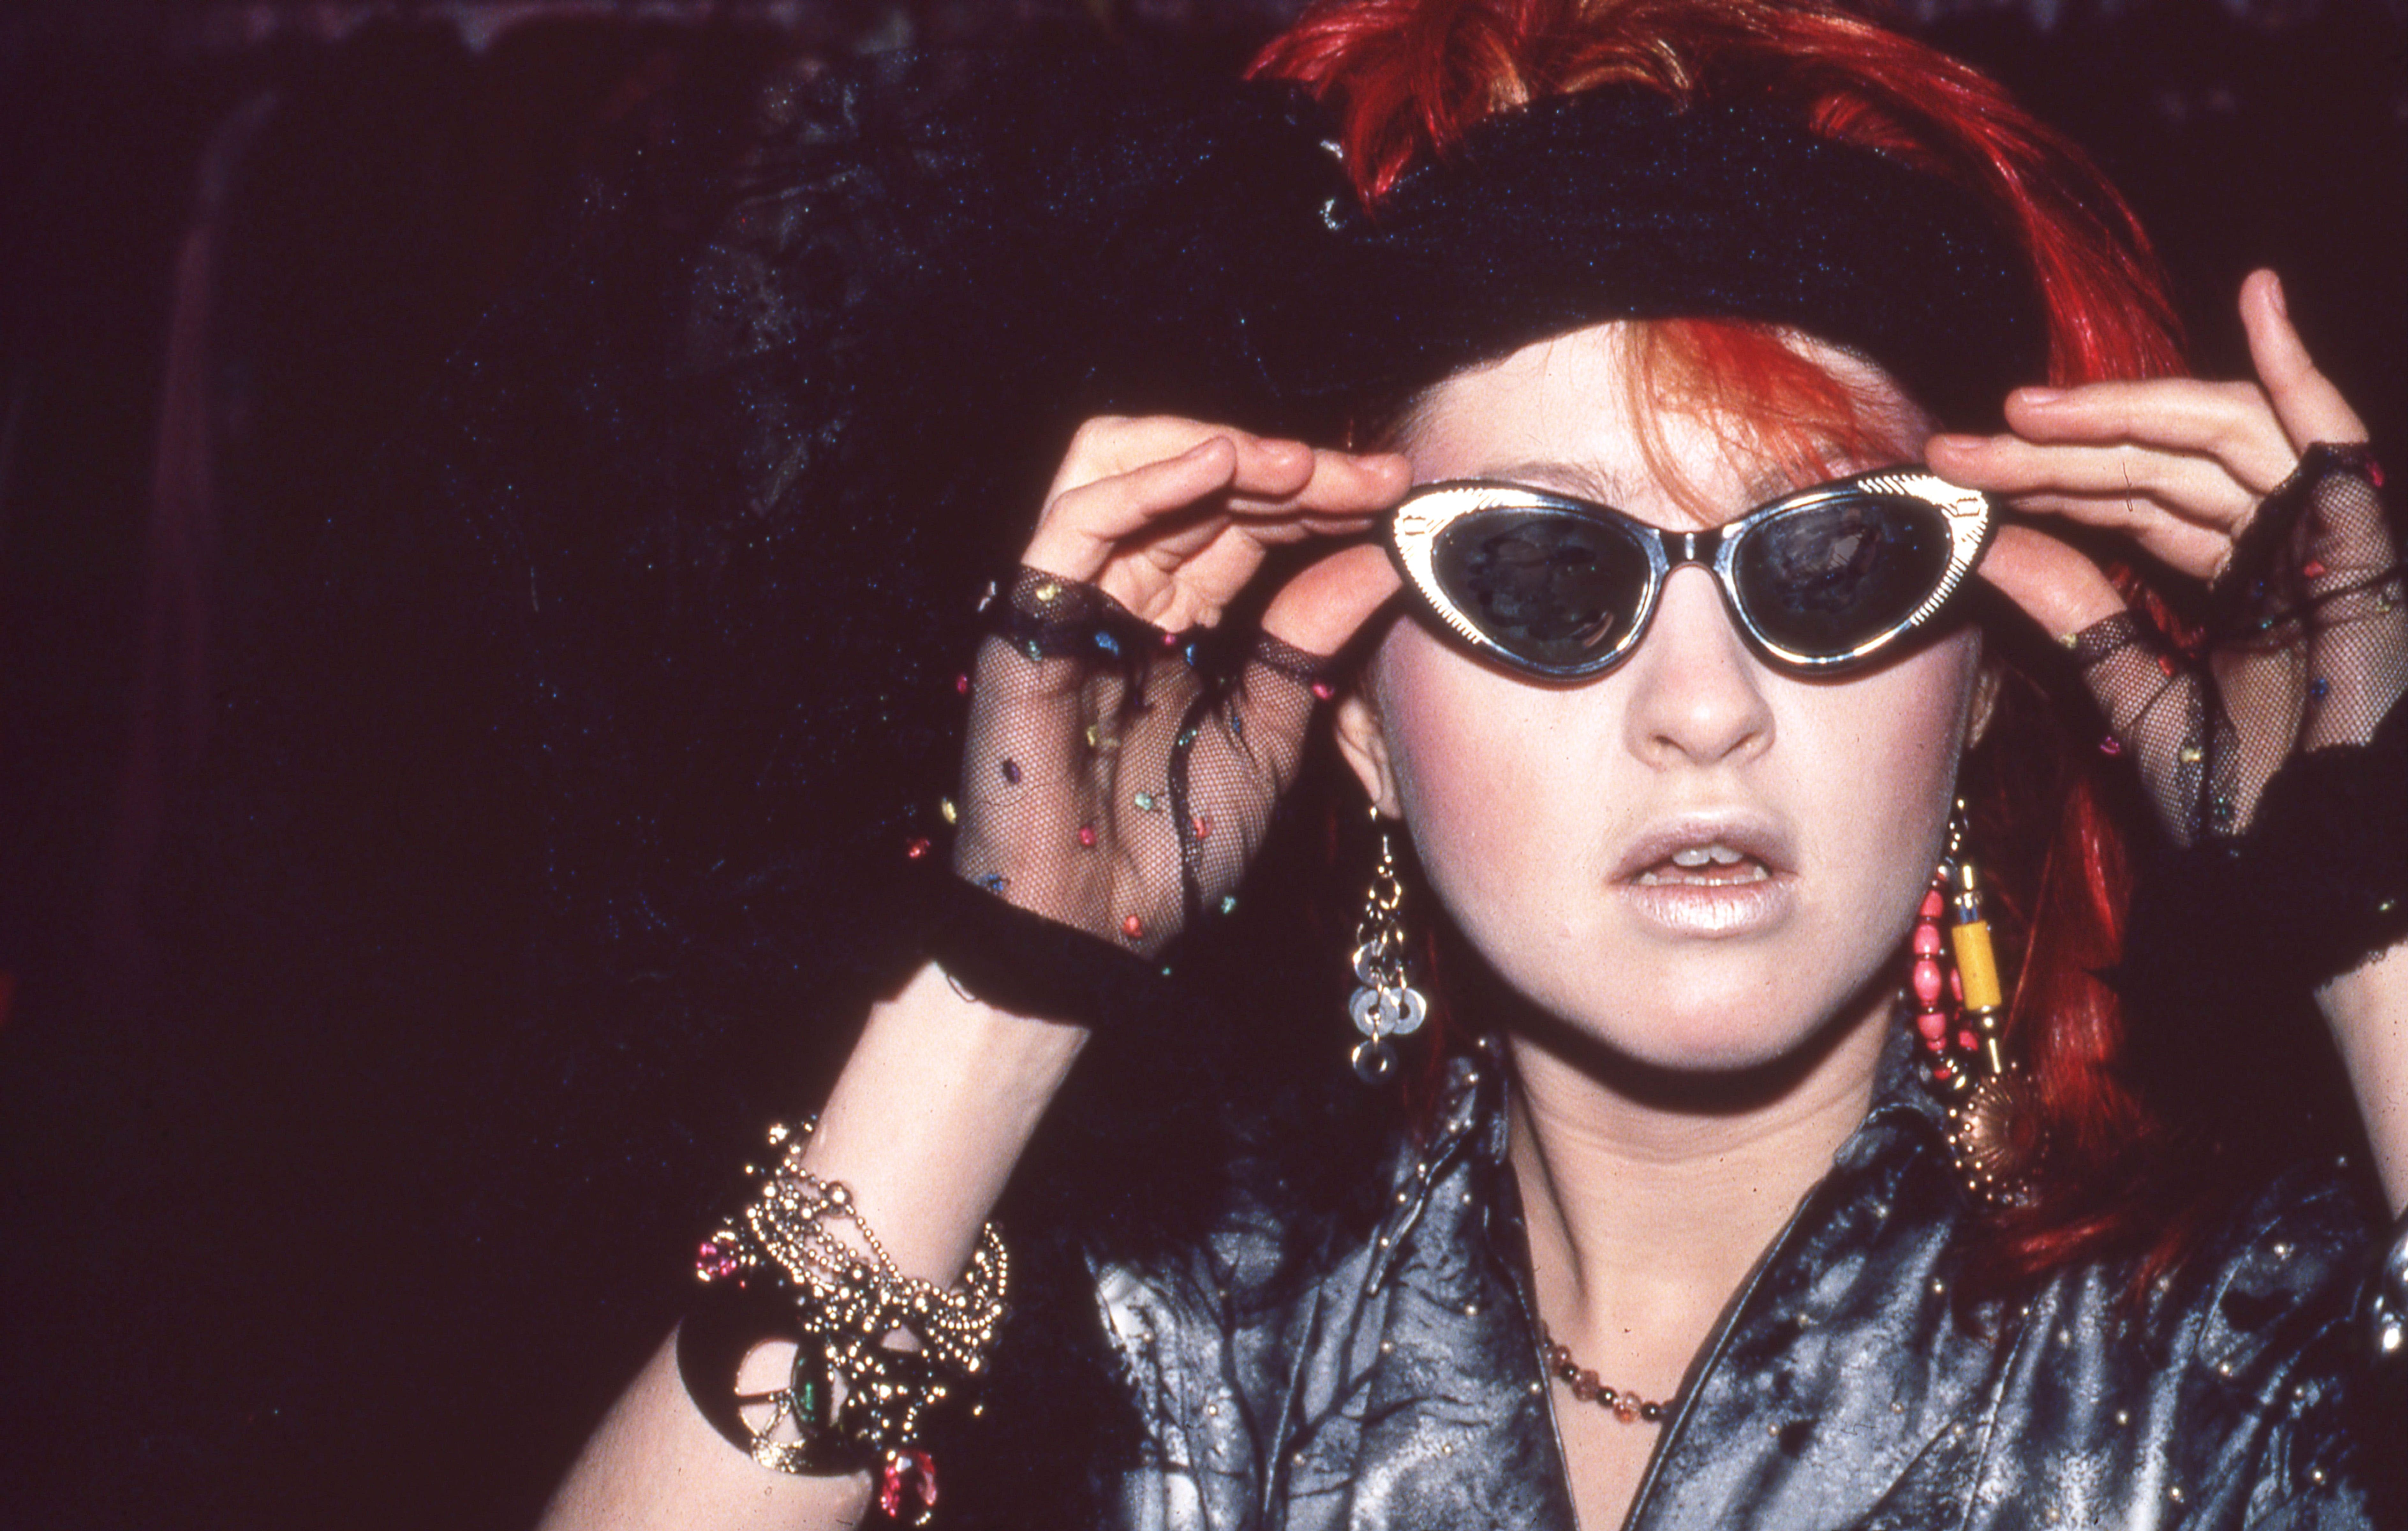 Cyndi Lauper announces farewell tour, documentary: 'Right now this is the best I can be'